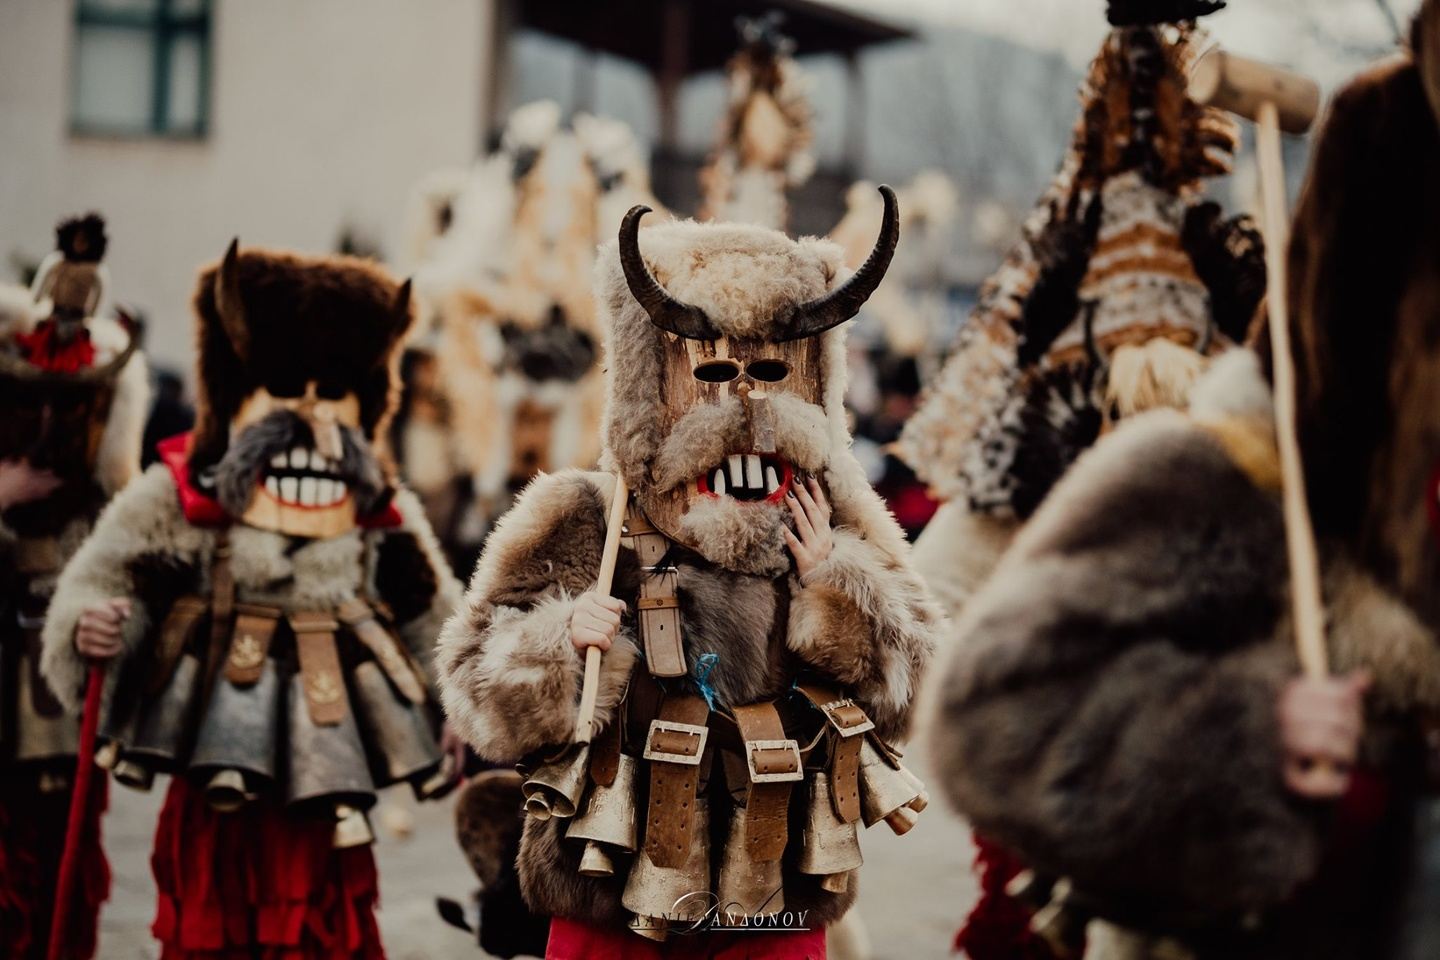 DISCOVER BULGARIA With participation in the KUKERI FESTIVAL